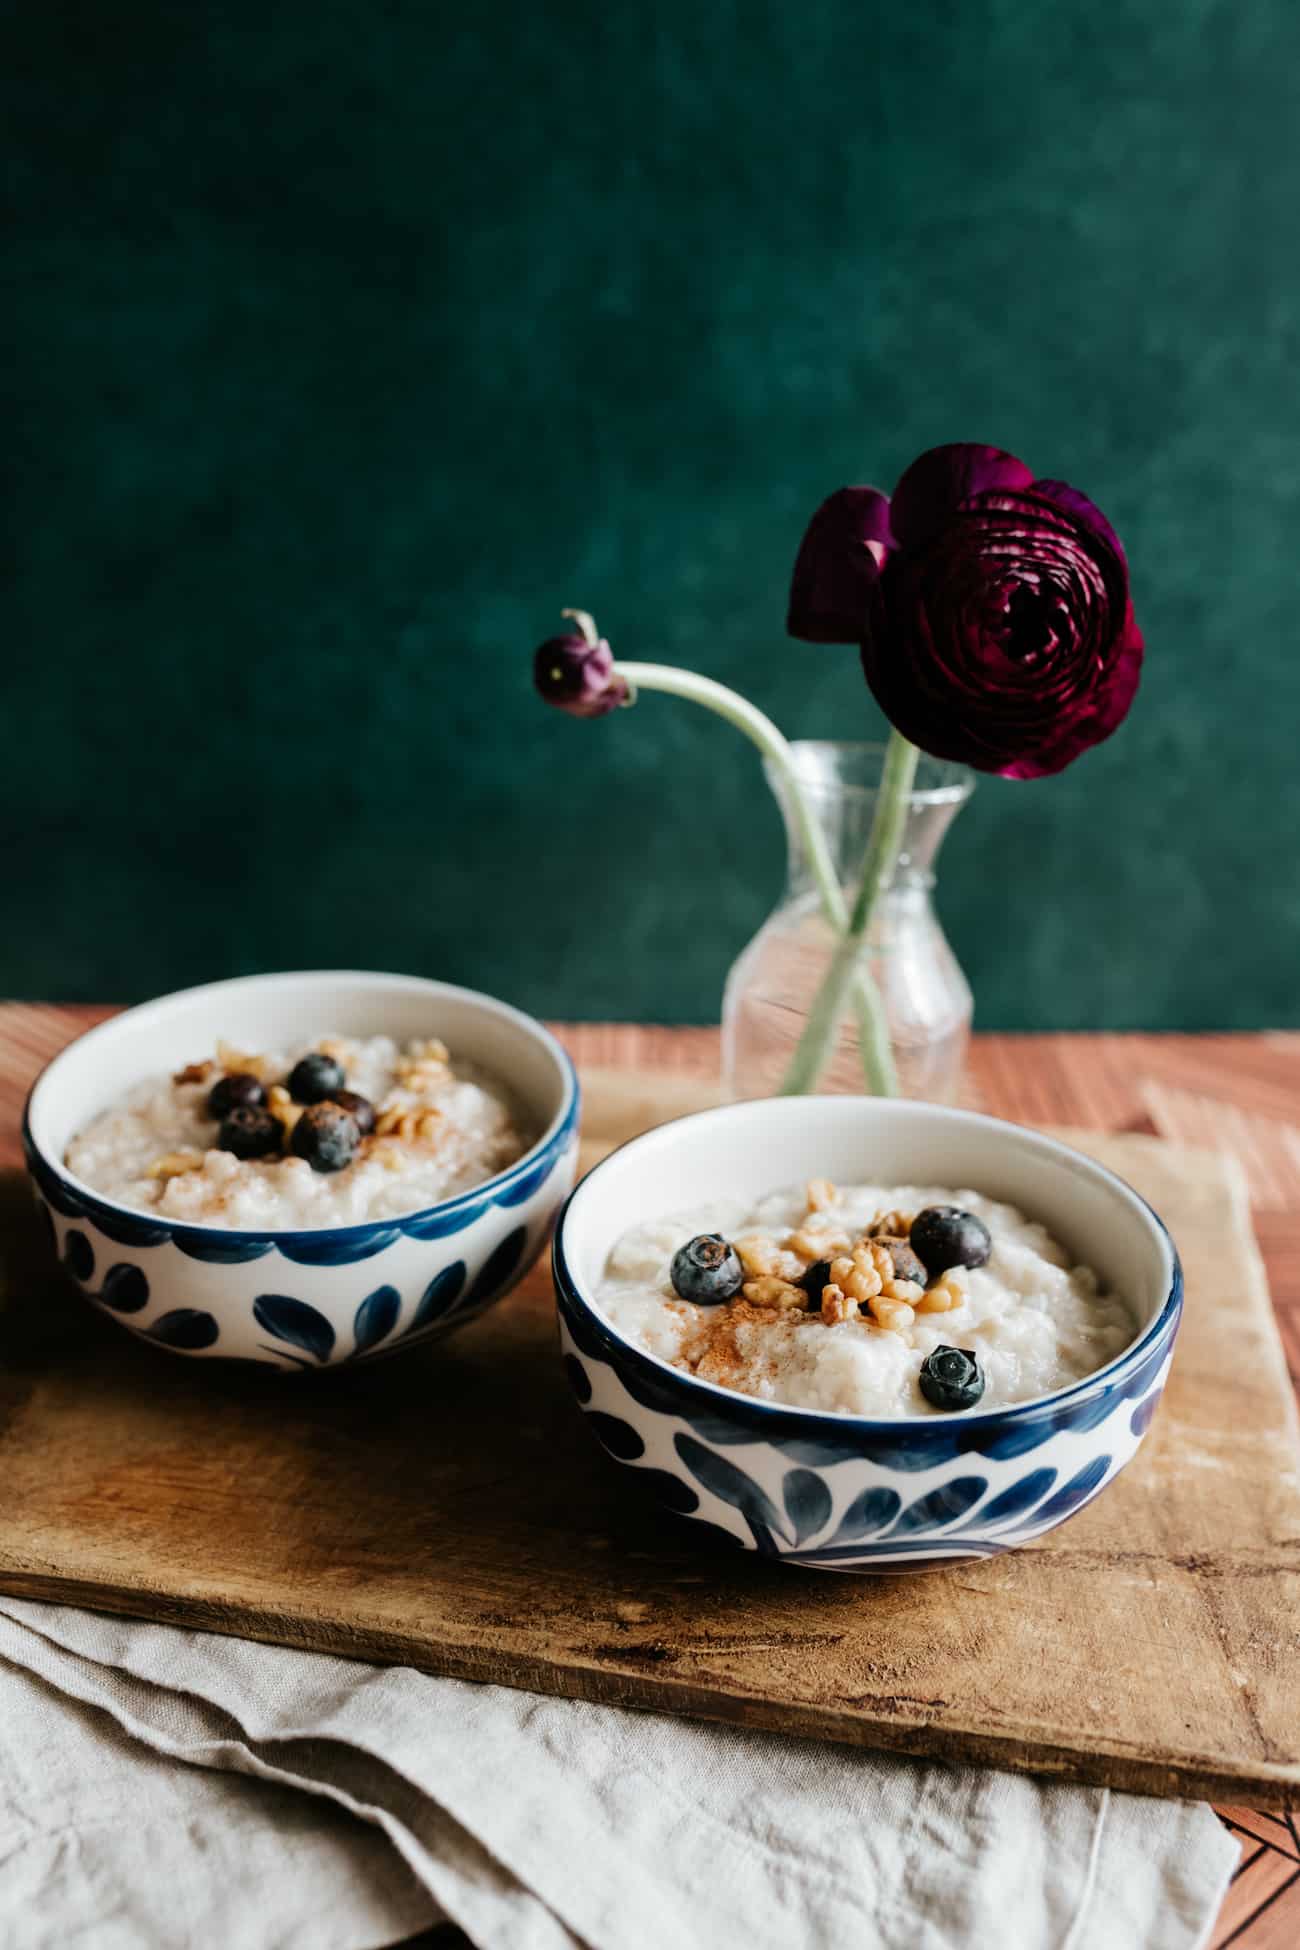 Old fashioned Mexican oatmeal (avena) in two blue and white painted bowls garnished with walnuts and blueberries. Renecula flower in a vase in the background.